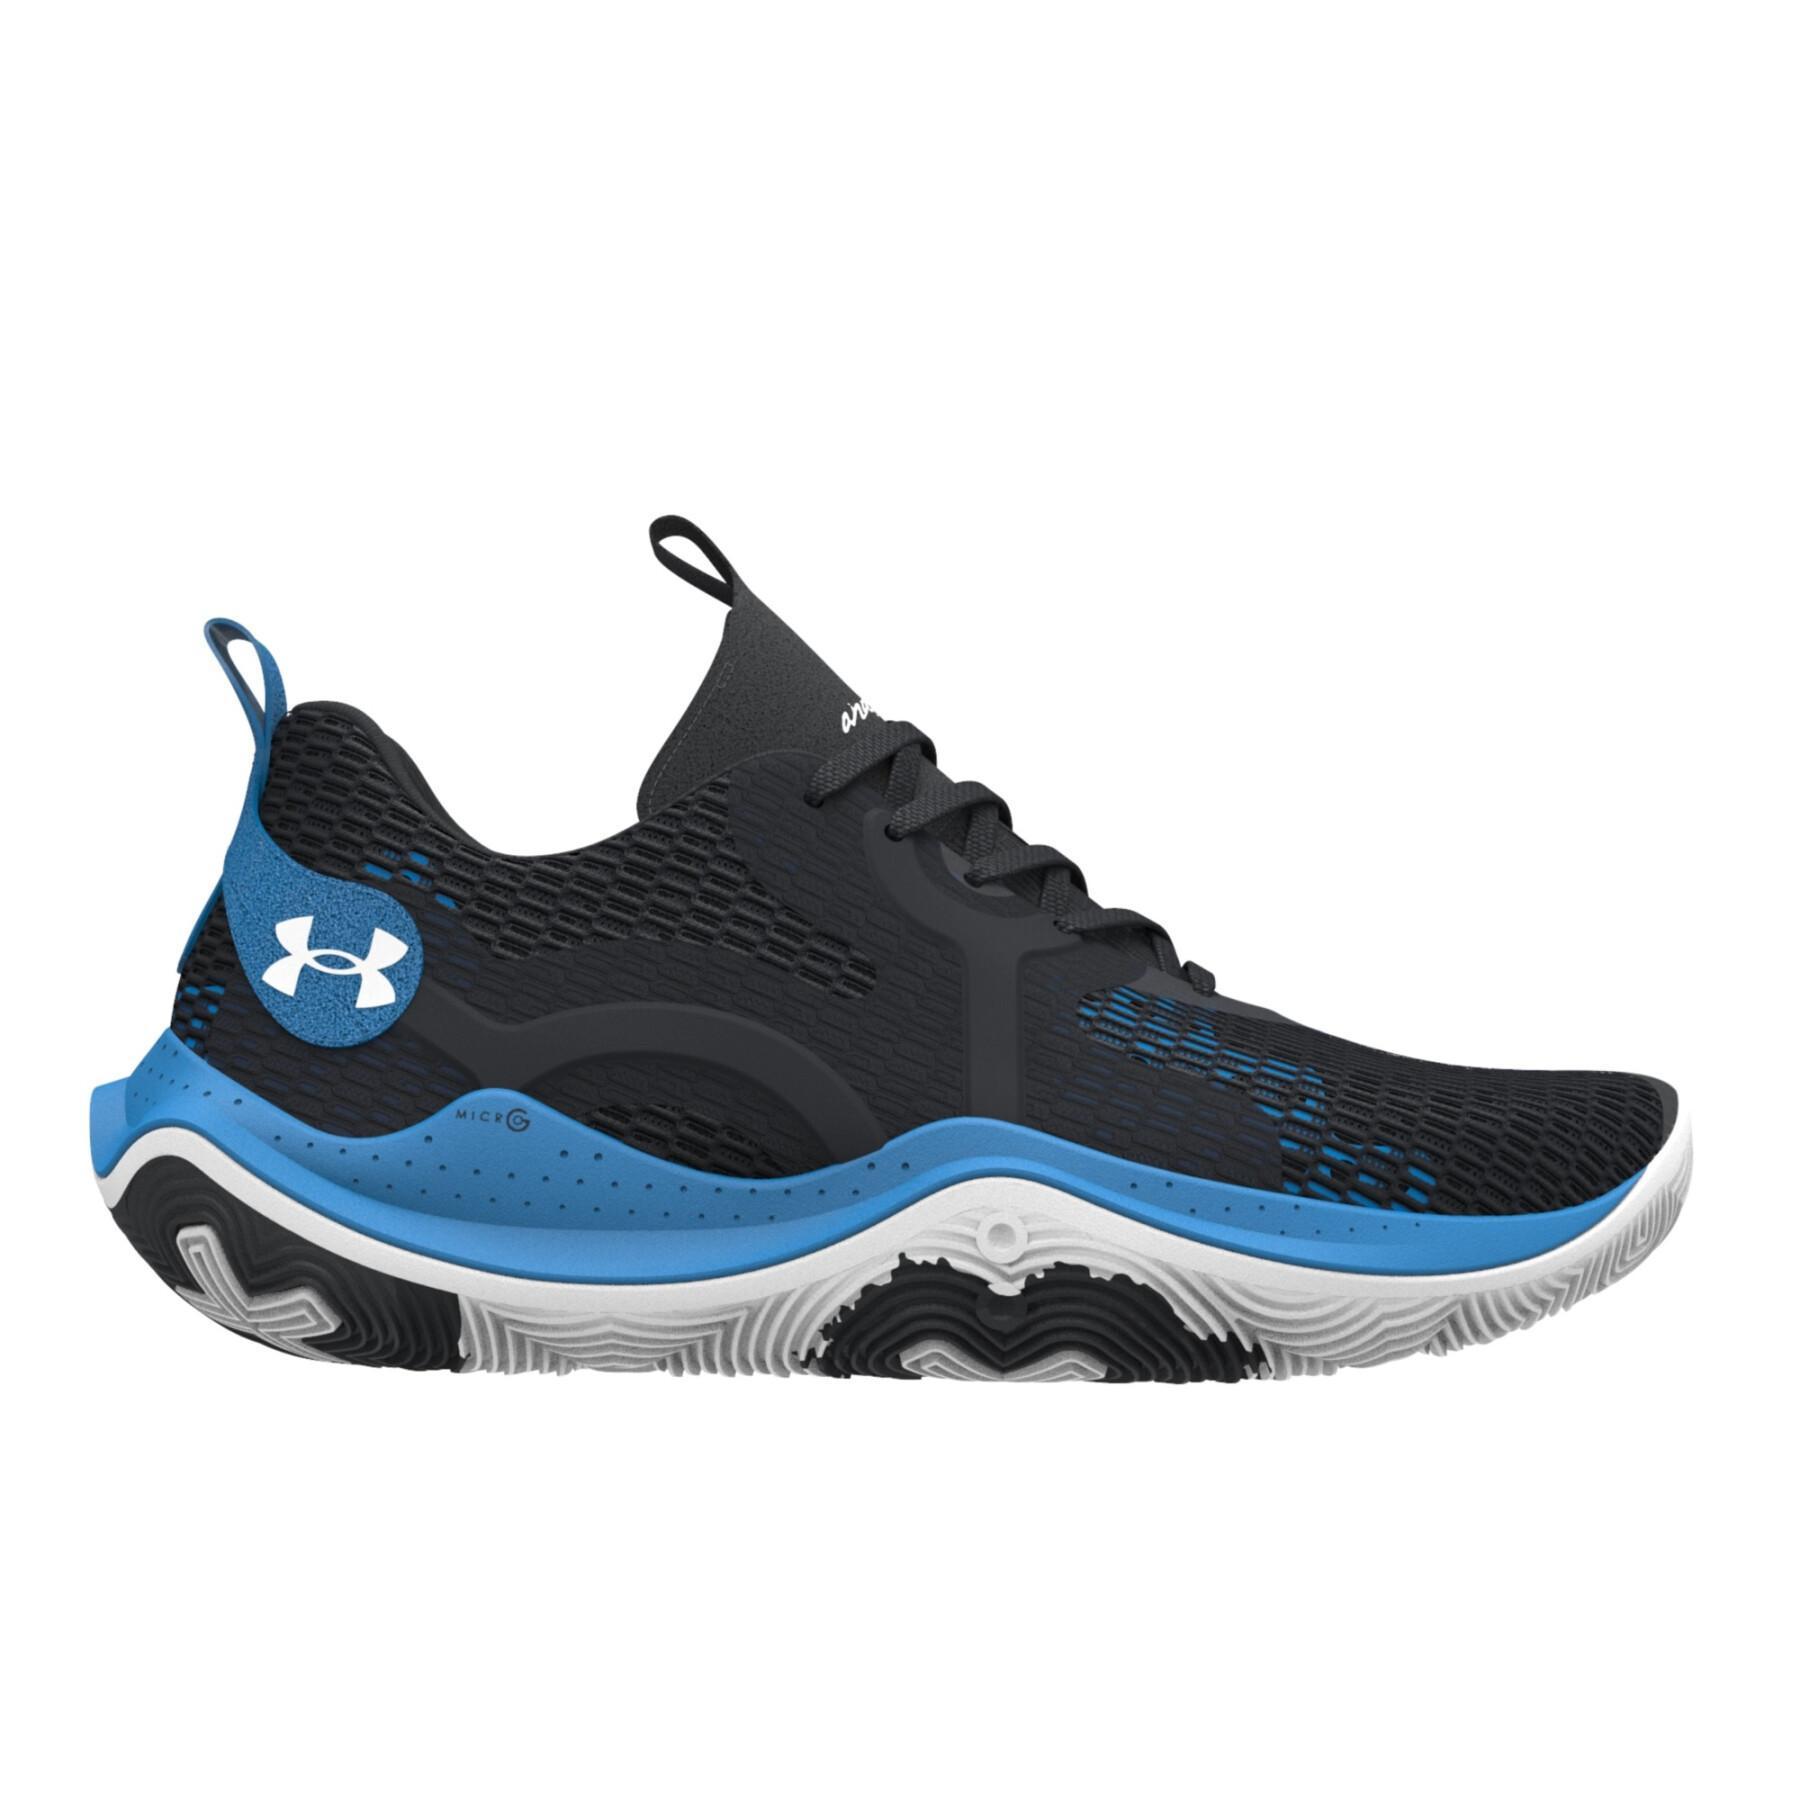 Under armour Spawn 3 Basketball Shoes Black